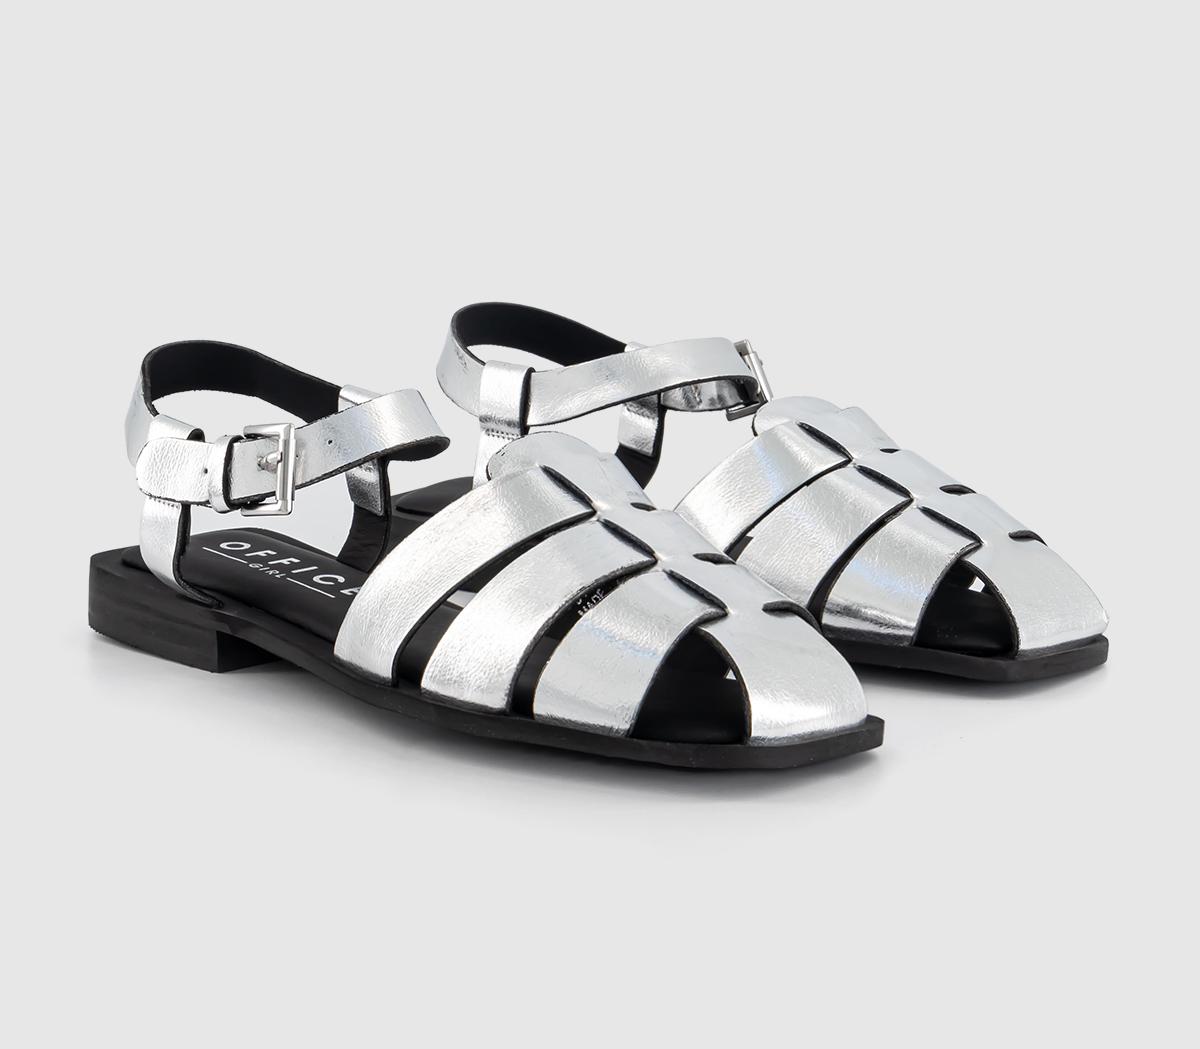 OFFICE Womens Sovereign Gladiator Sandals Silver, 7